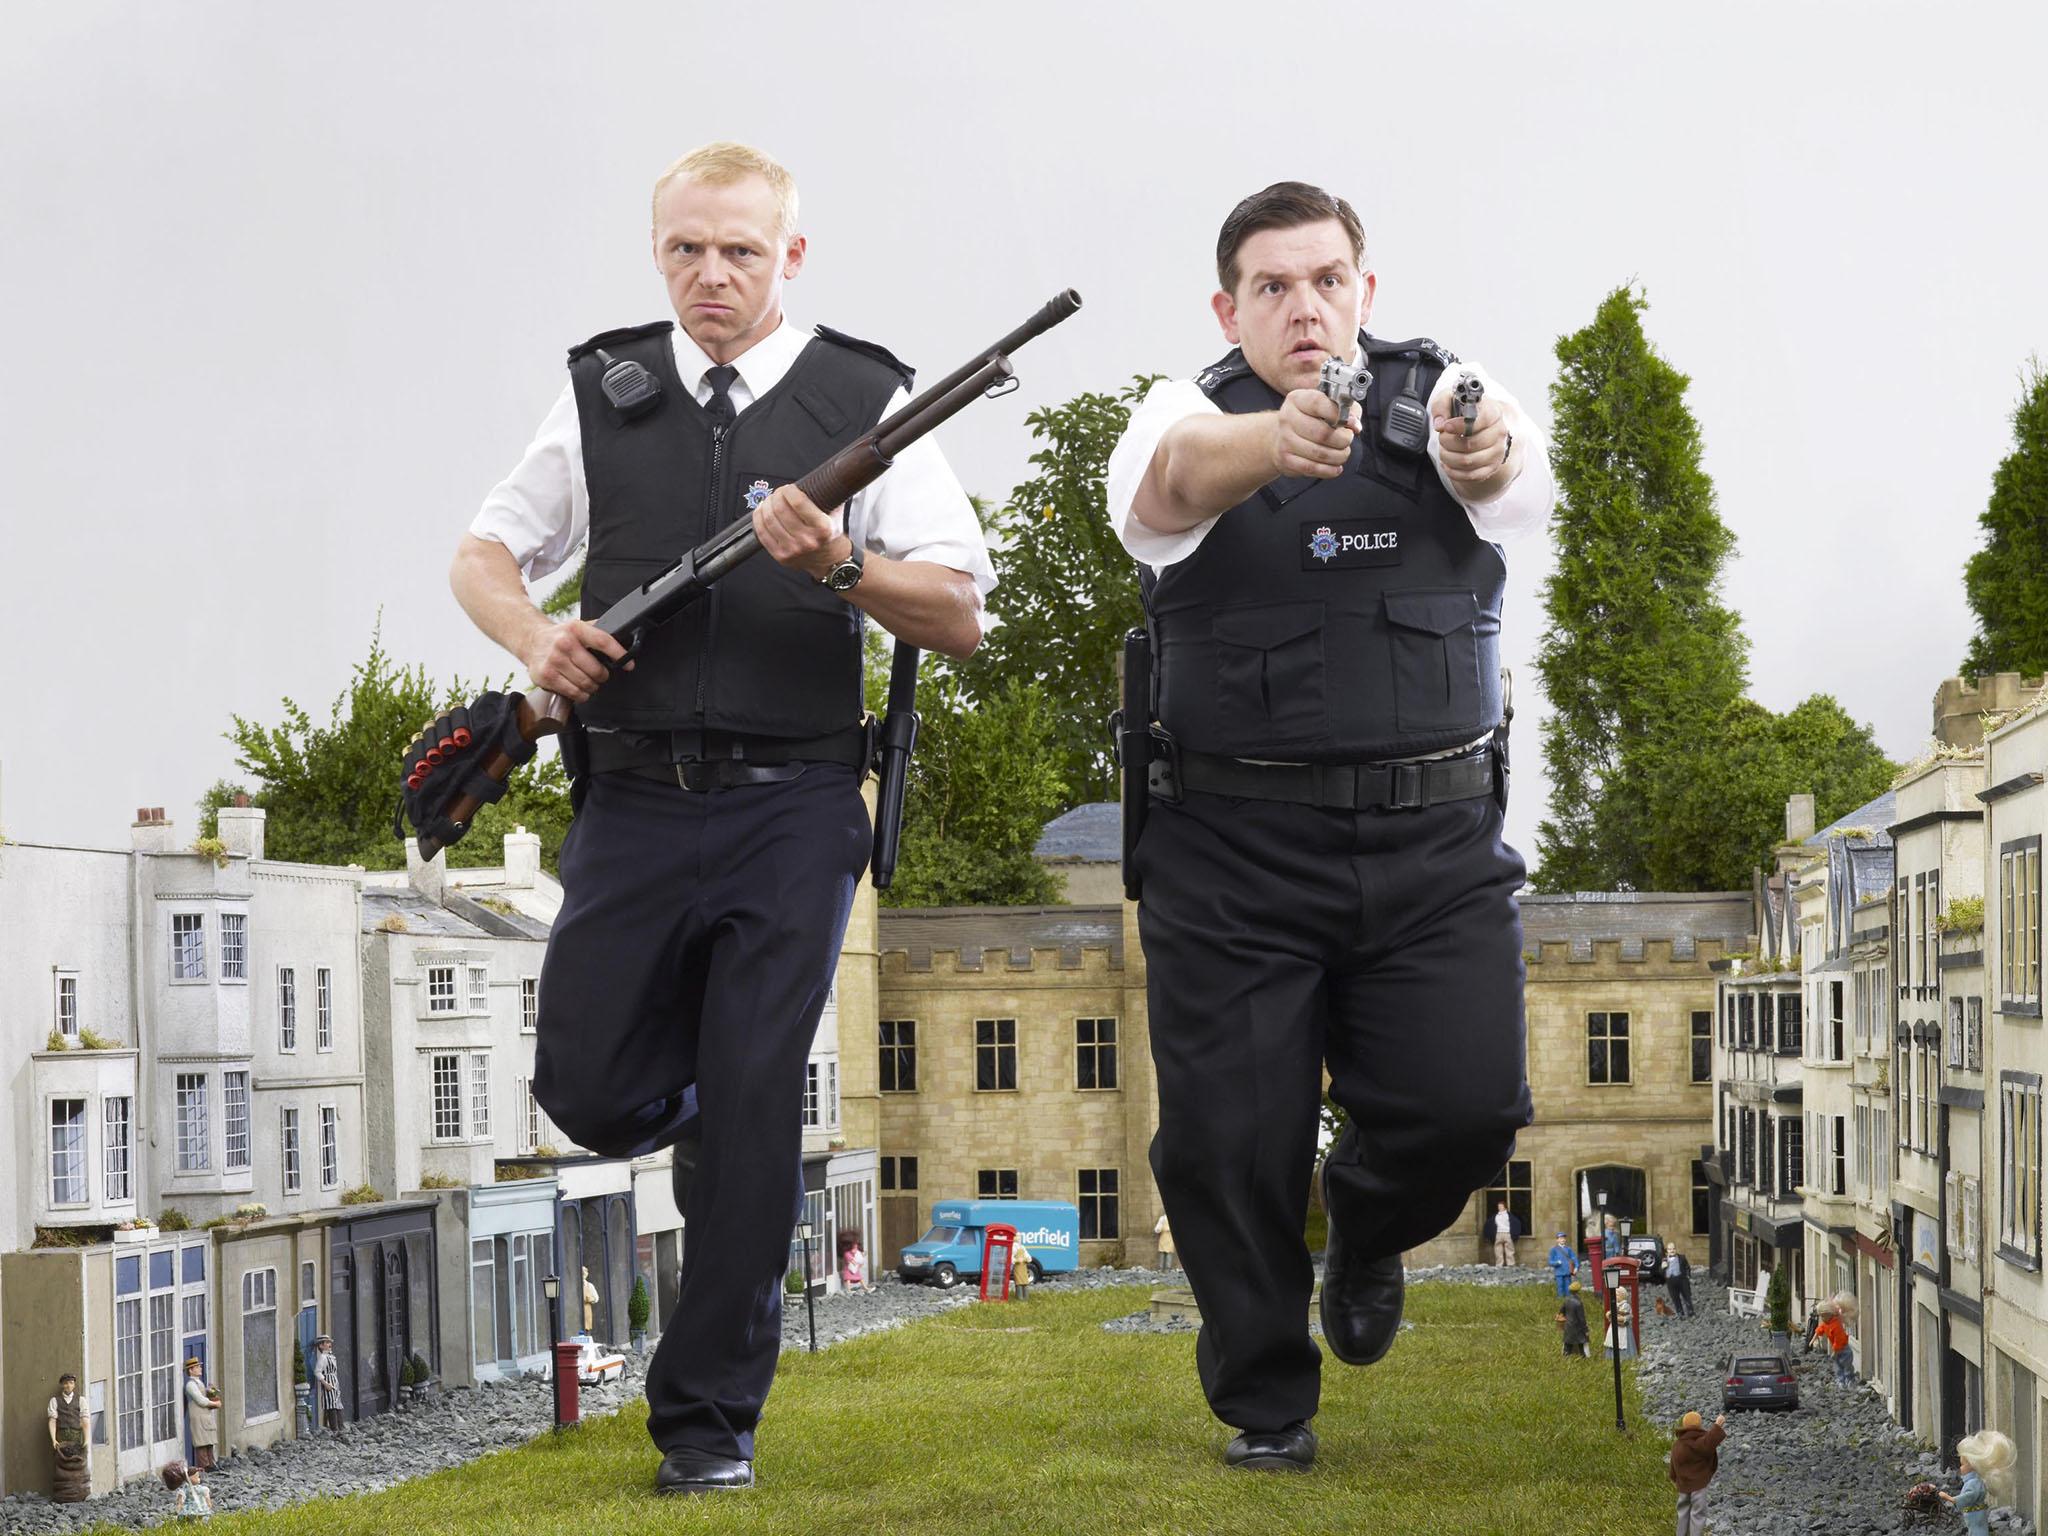 Simon Pegg (left) as Nicholas Angel and Nick Frost (right) as PC Danny Butterman in Wright's 'Hot Fuzz'